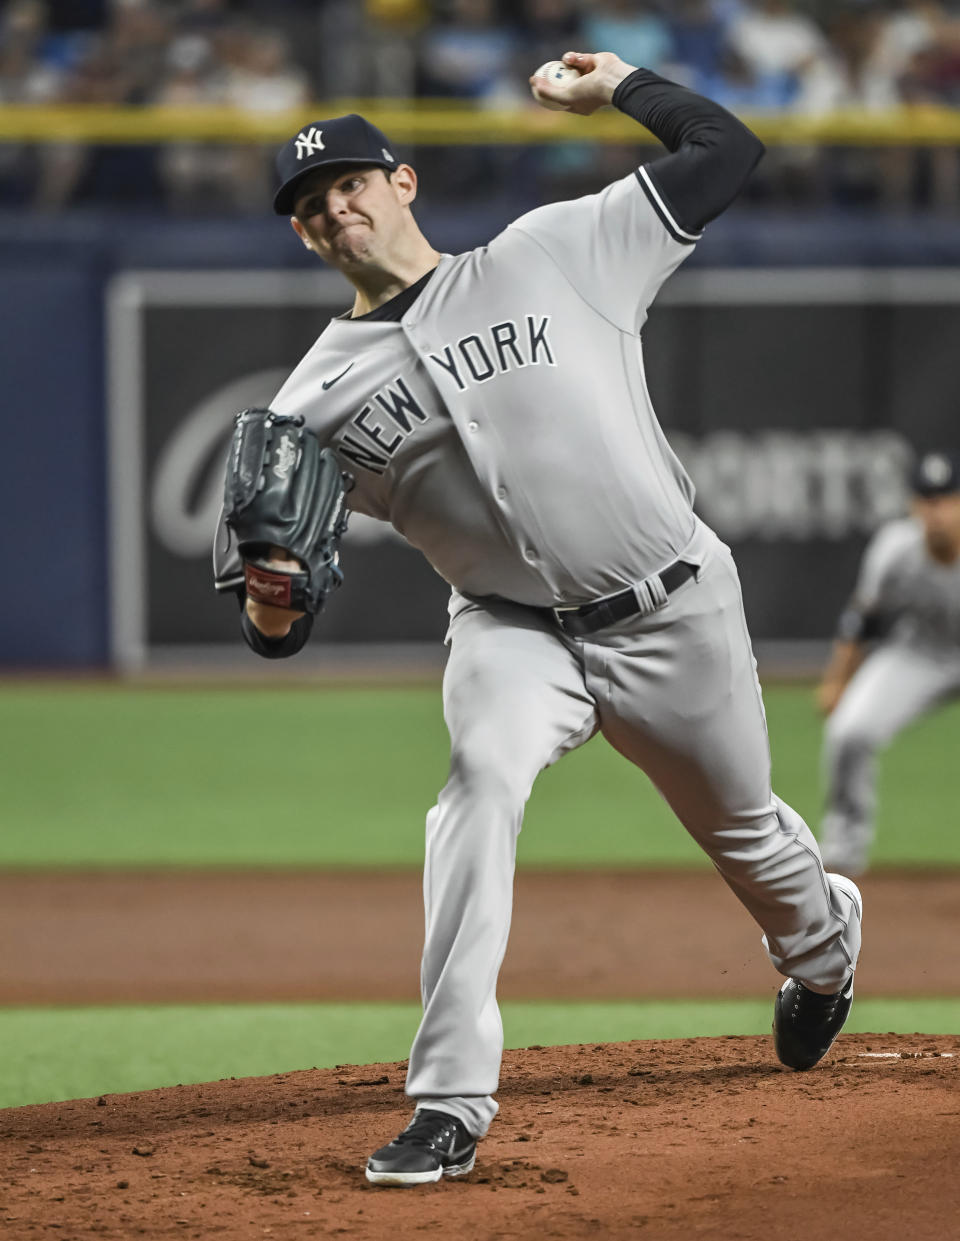 New York Yankees starter Jordan Montgomery pitches to a Tampa Bay Rays batter during the first inning of a baseball game Tuesday, July 27, 2021, in St. Petersburg, Fla. (AP Photo/Steve Nesius)